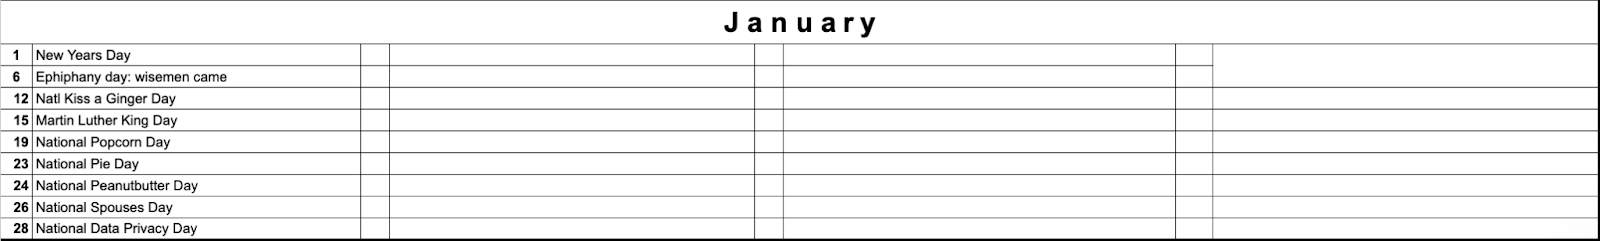 January Example events table